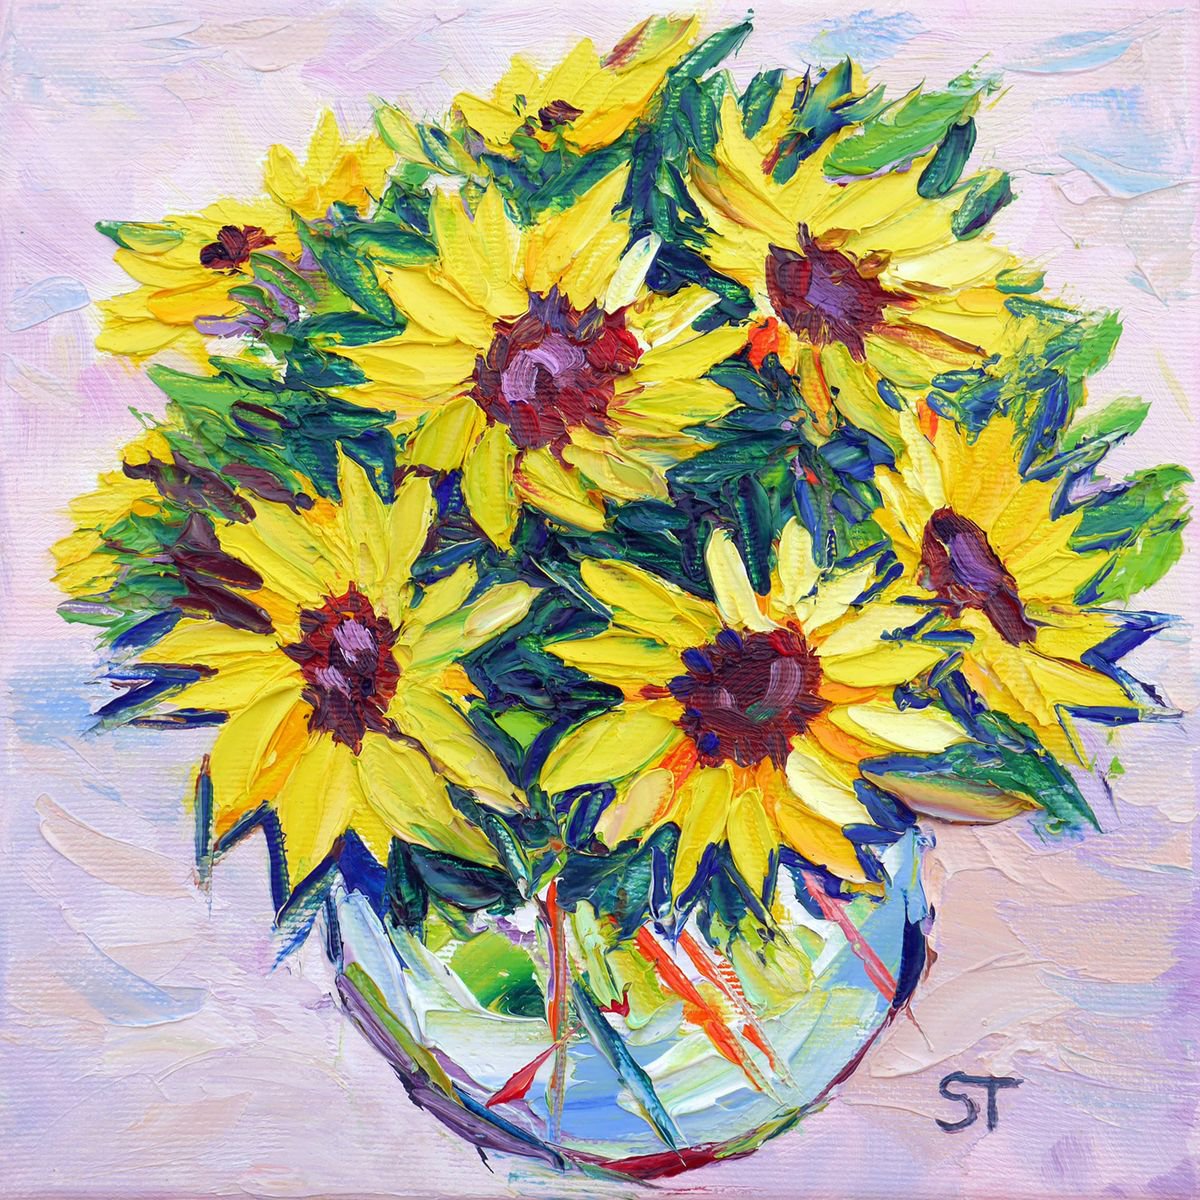 Sunflowers in a glass original oil floral painting on canvas, small wall decor, gift ide... by Tashe